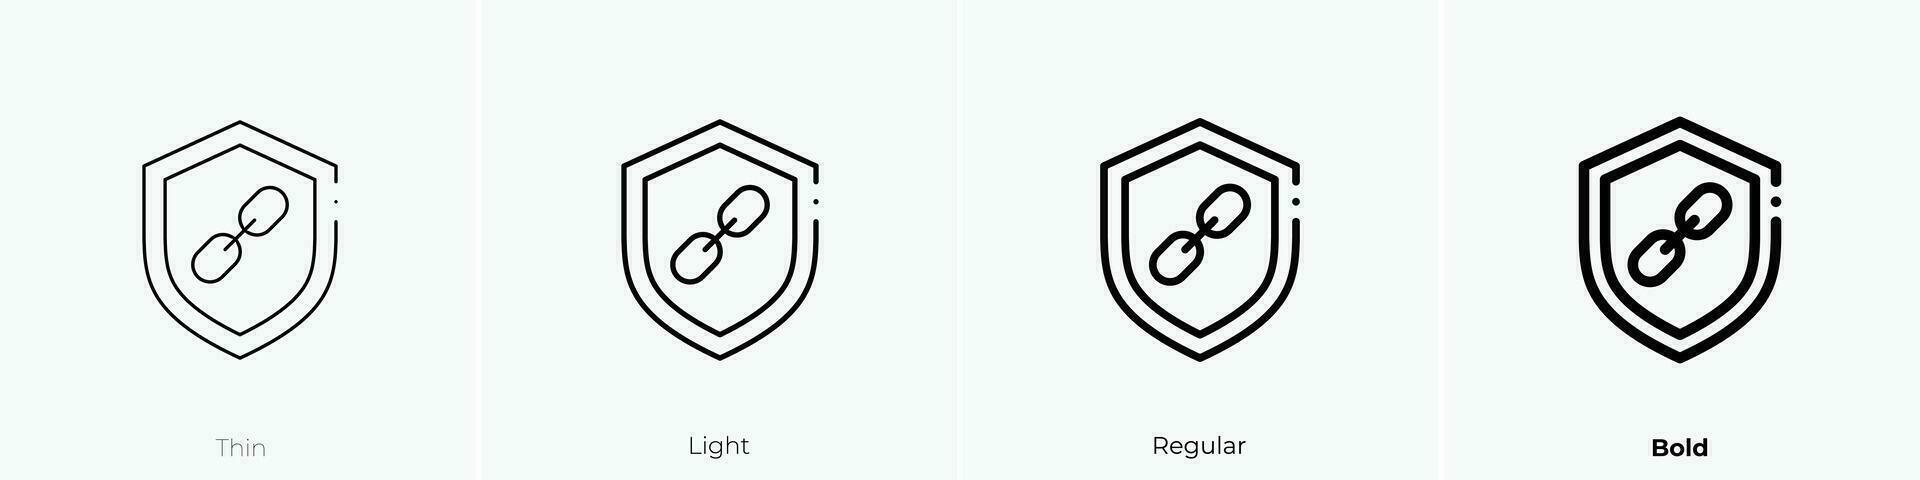 protect icon. Thin, Light, Regular And Bold style design isolated on white background vector